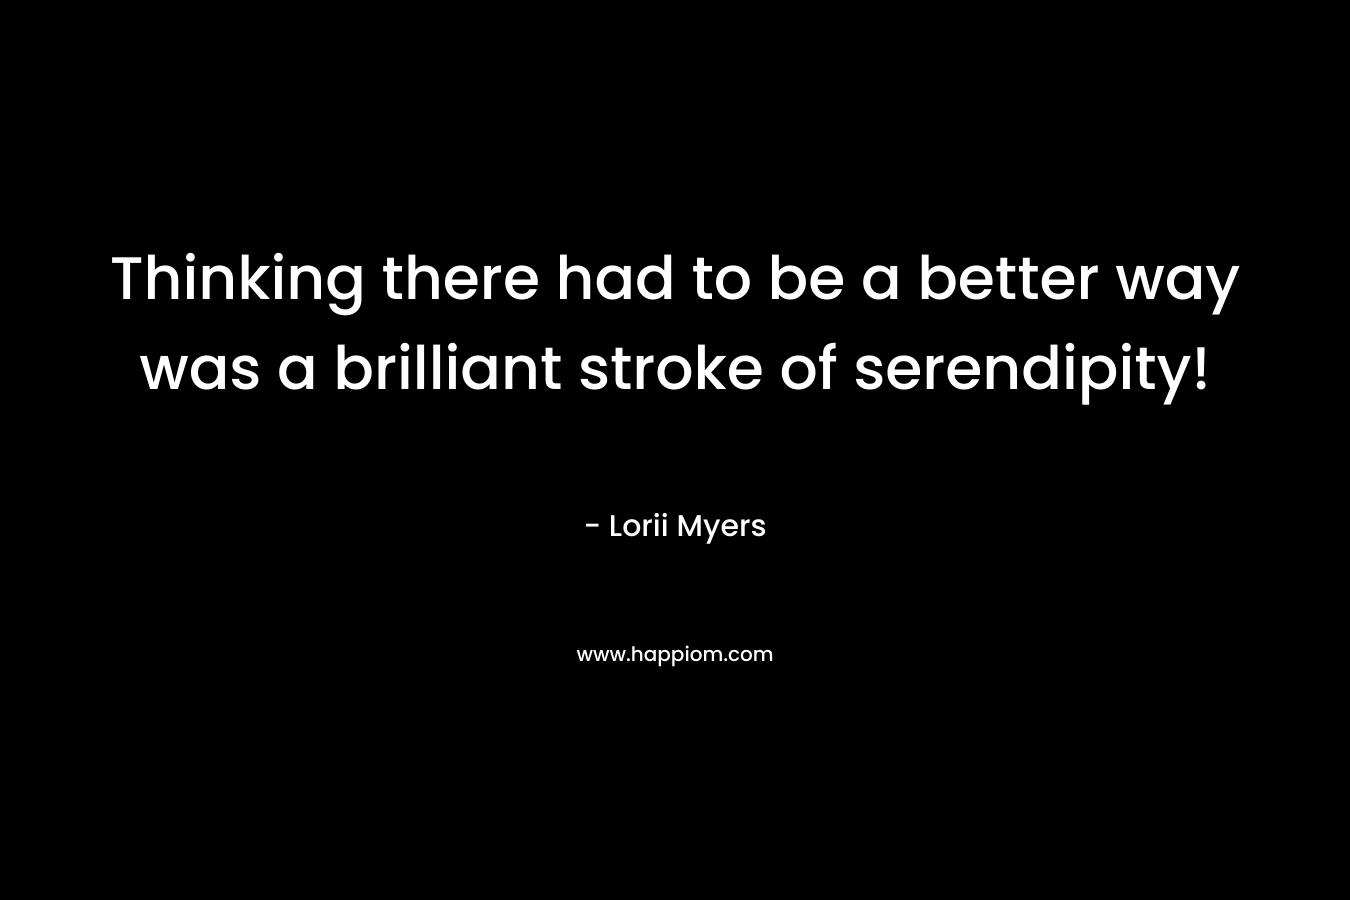 Thinking there had to be a better way was a brilliant stroke of serendipity! – Lorii Myers